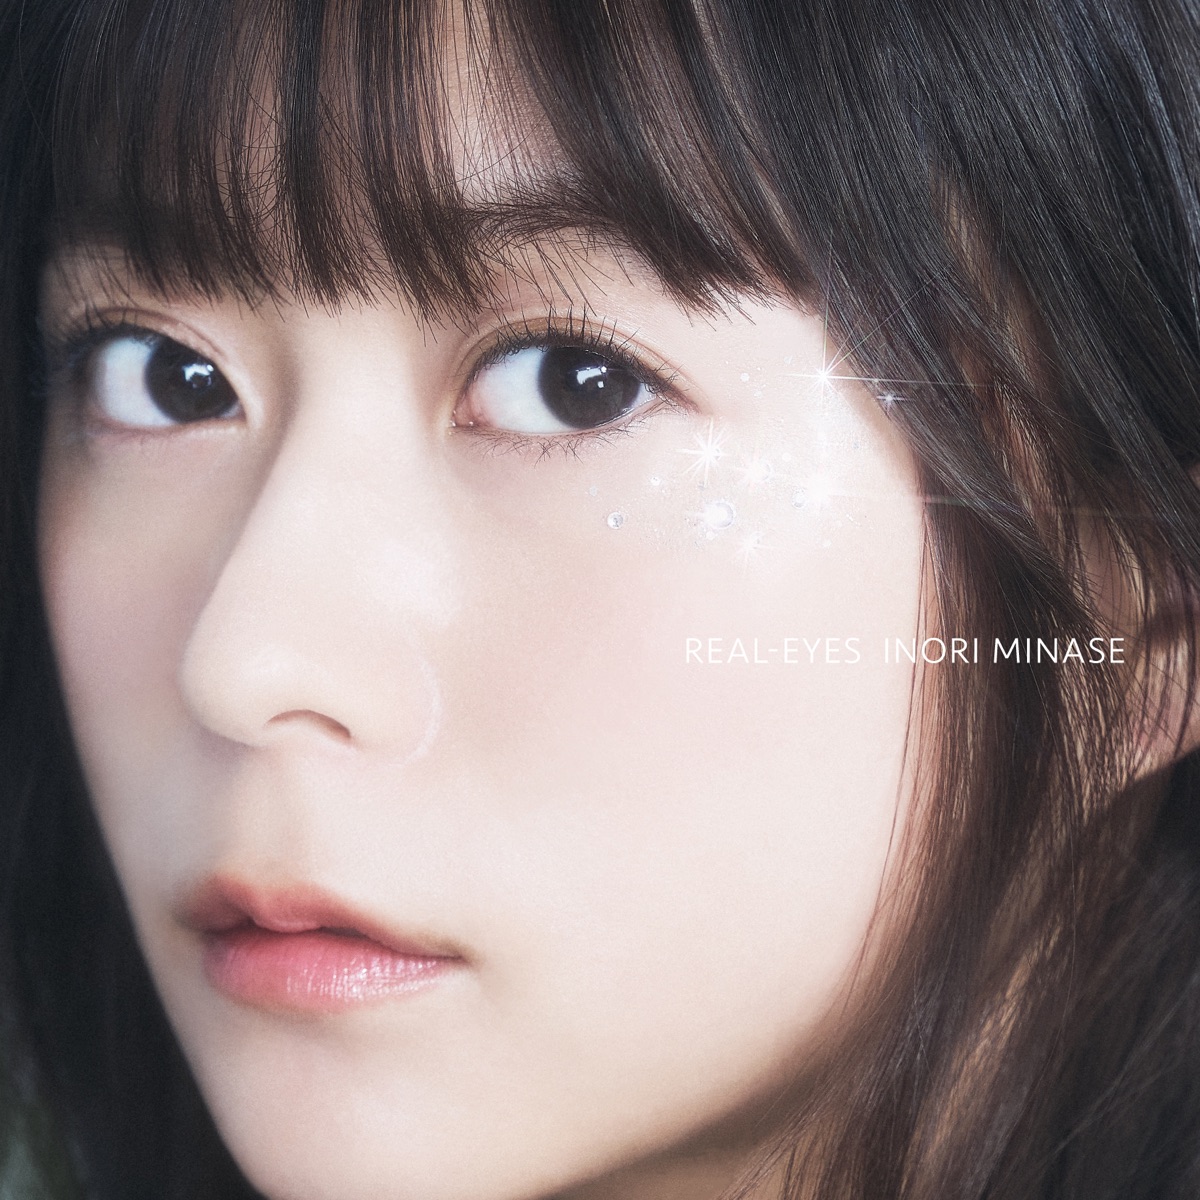 Cover art for『Inori Minase - REAL-EYES』from the release『REAL-EYES』